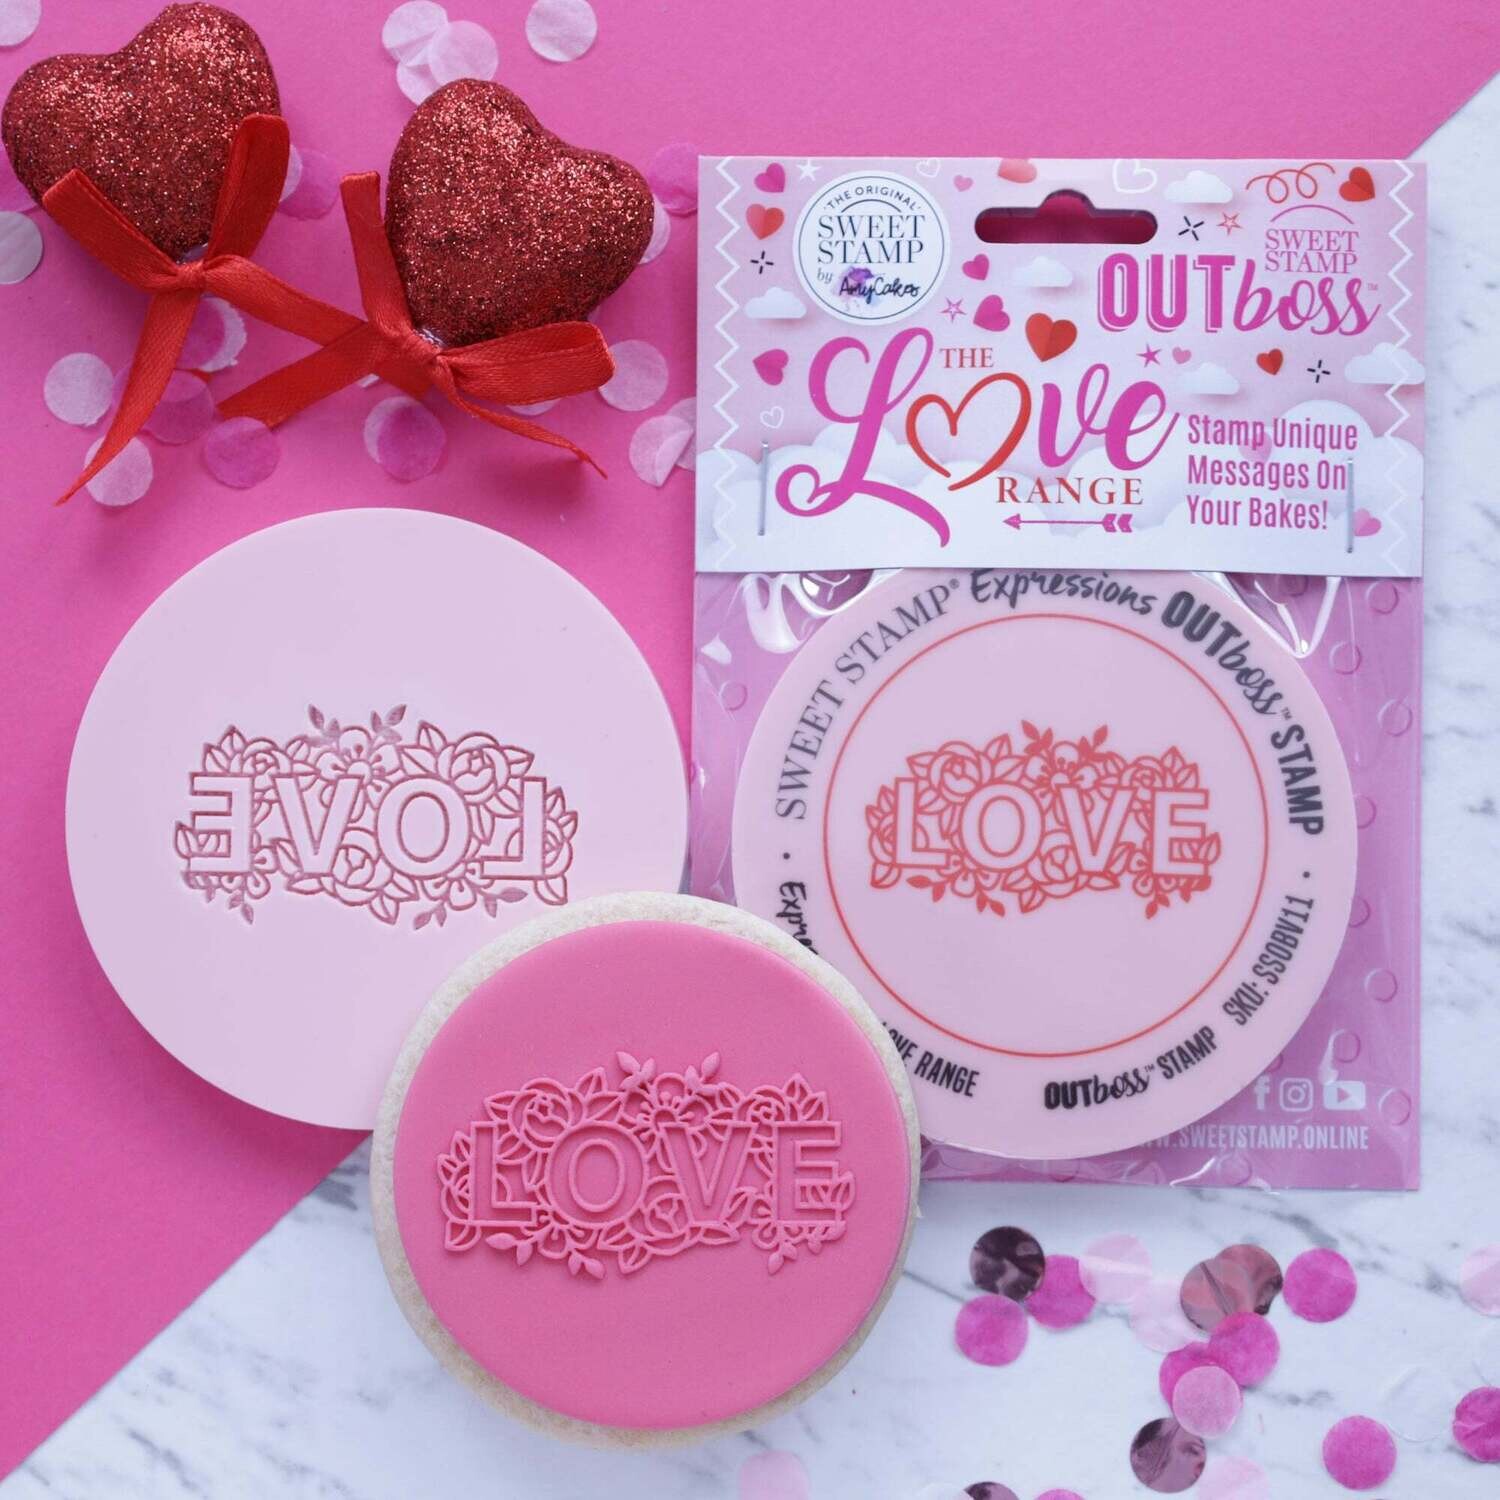 Sweet Stamp -OUTboss Expressions -FLORAL 'LOVE' - Σφραγίδα με Τριανταφυλλάκια